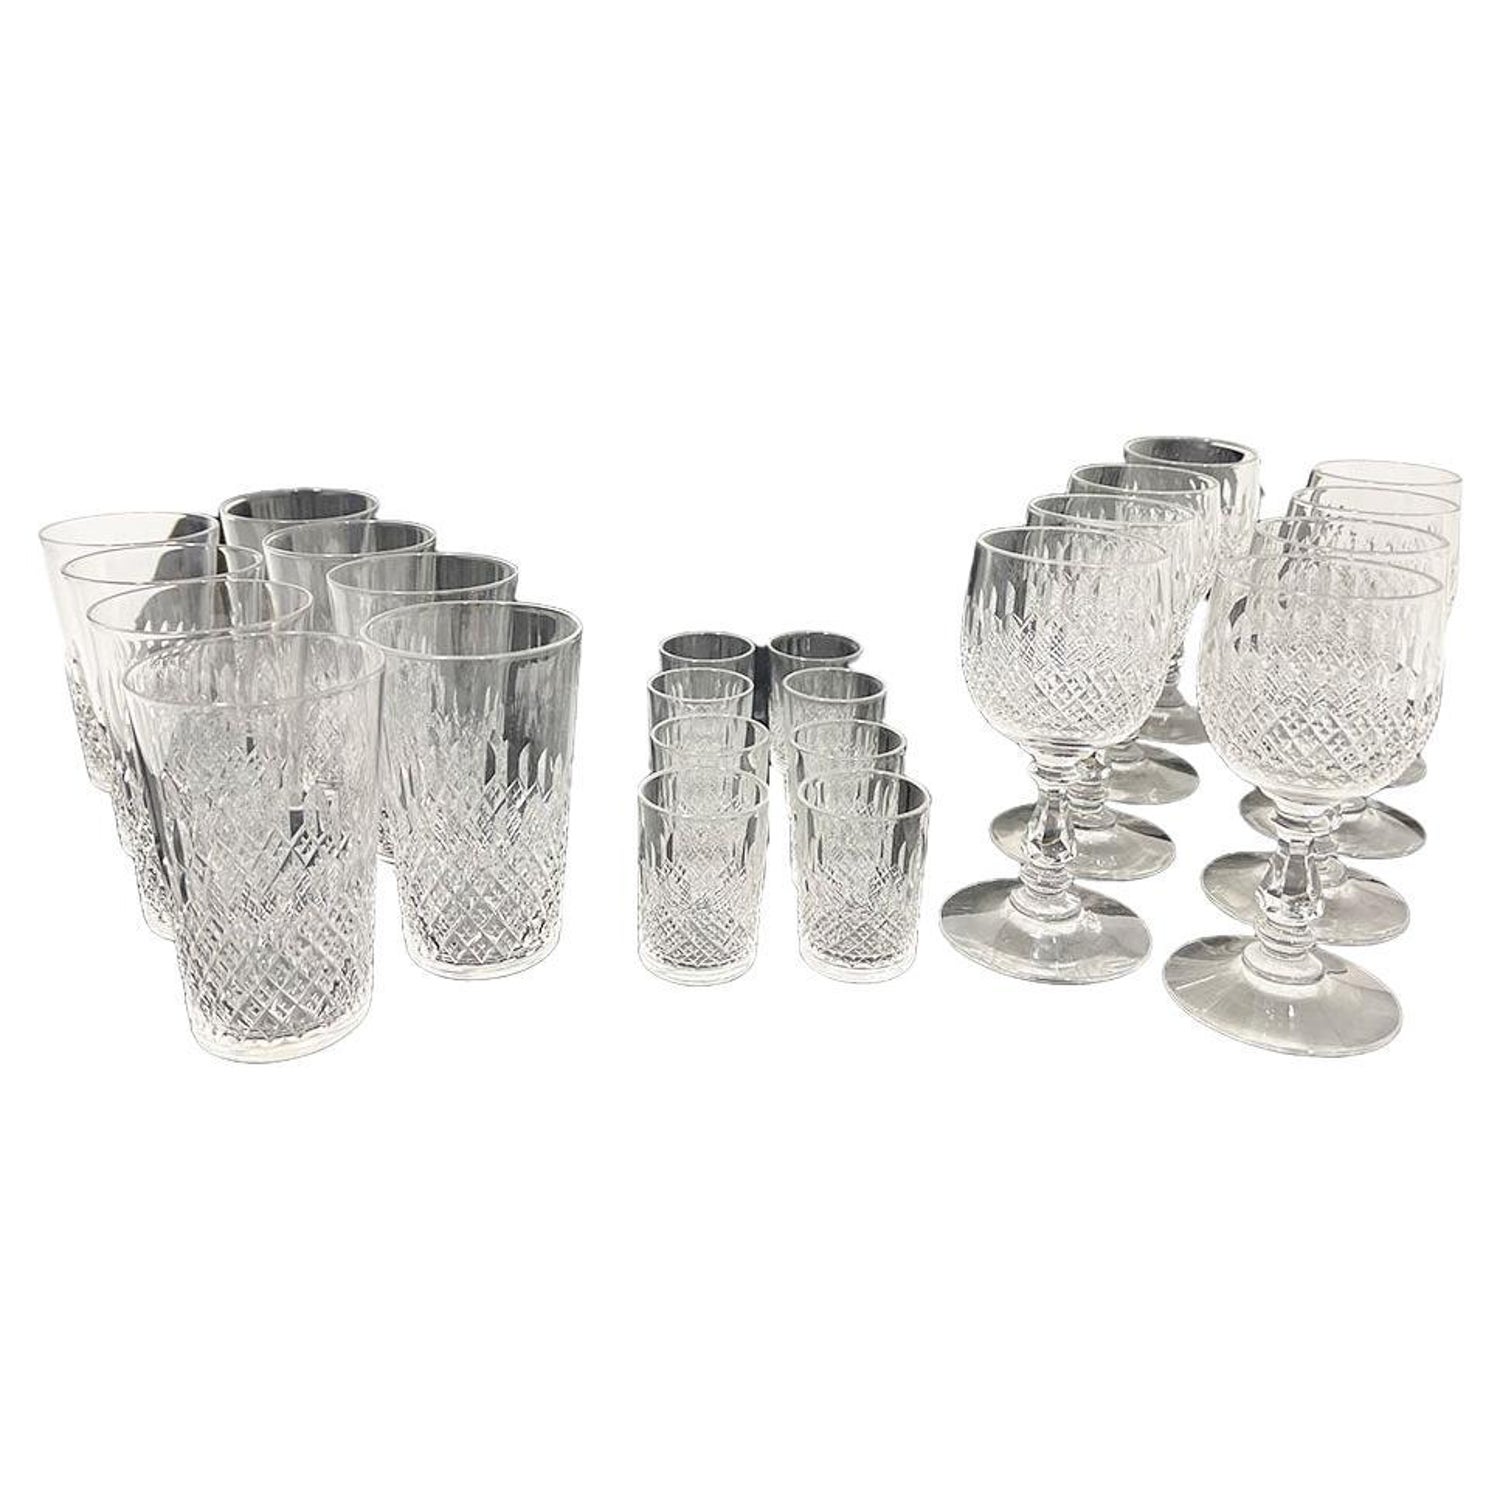 https://a.1stdibscdn.com/crystal-glasses-of-24-pieces-set-for-8-for-sale/f_34651/f_322038621673601190819/f_32203862_1673601191024_bg_processed.jpg?width=1500